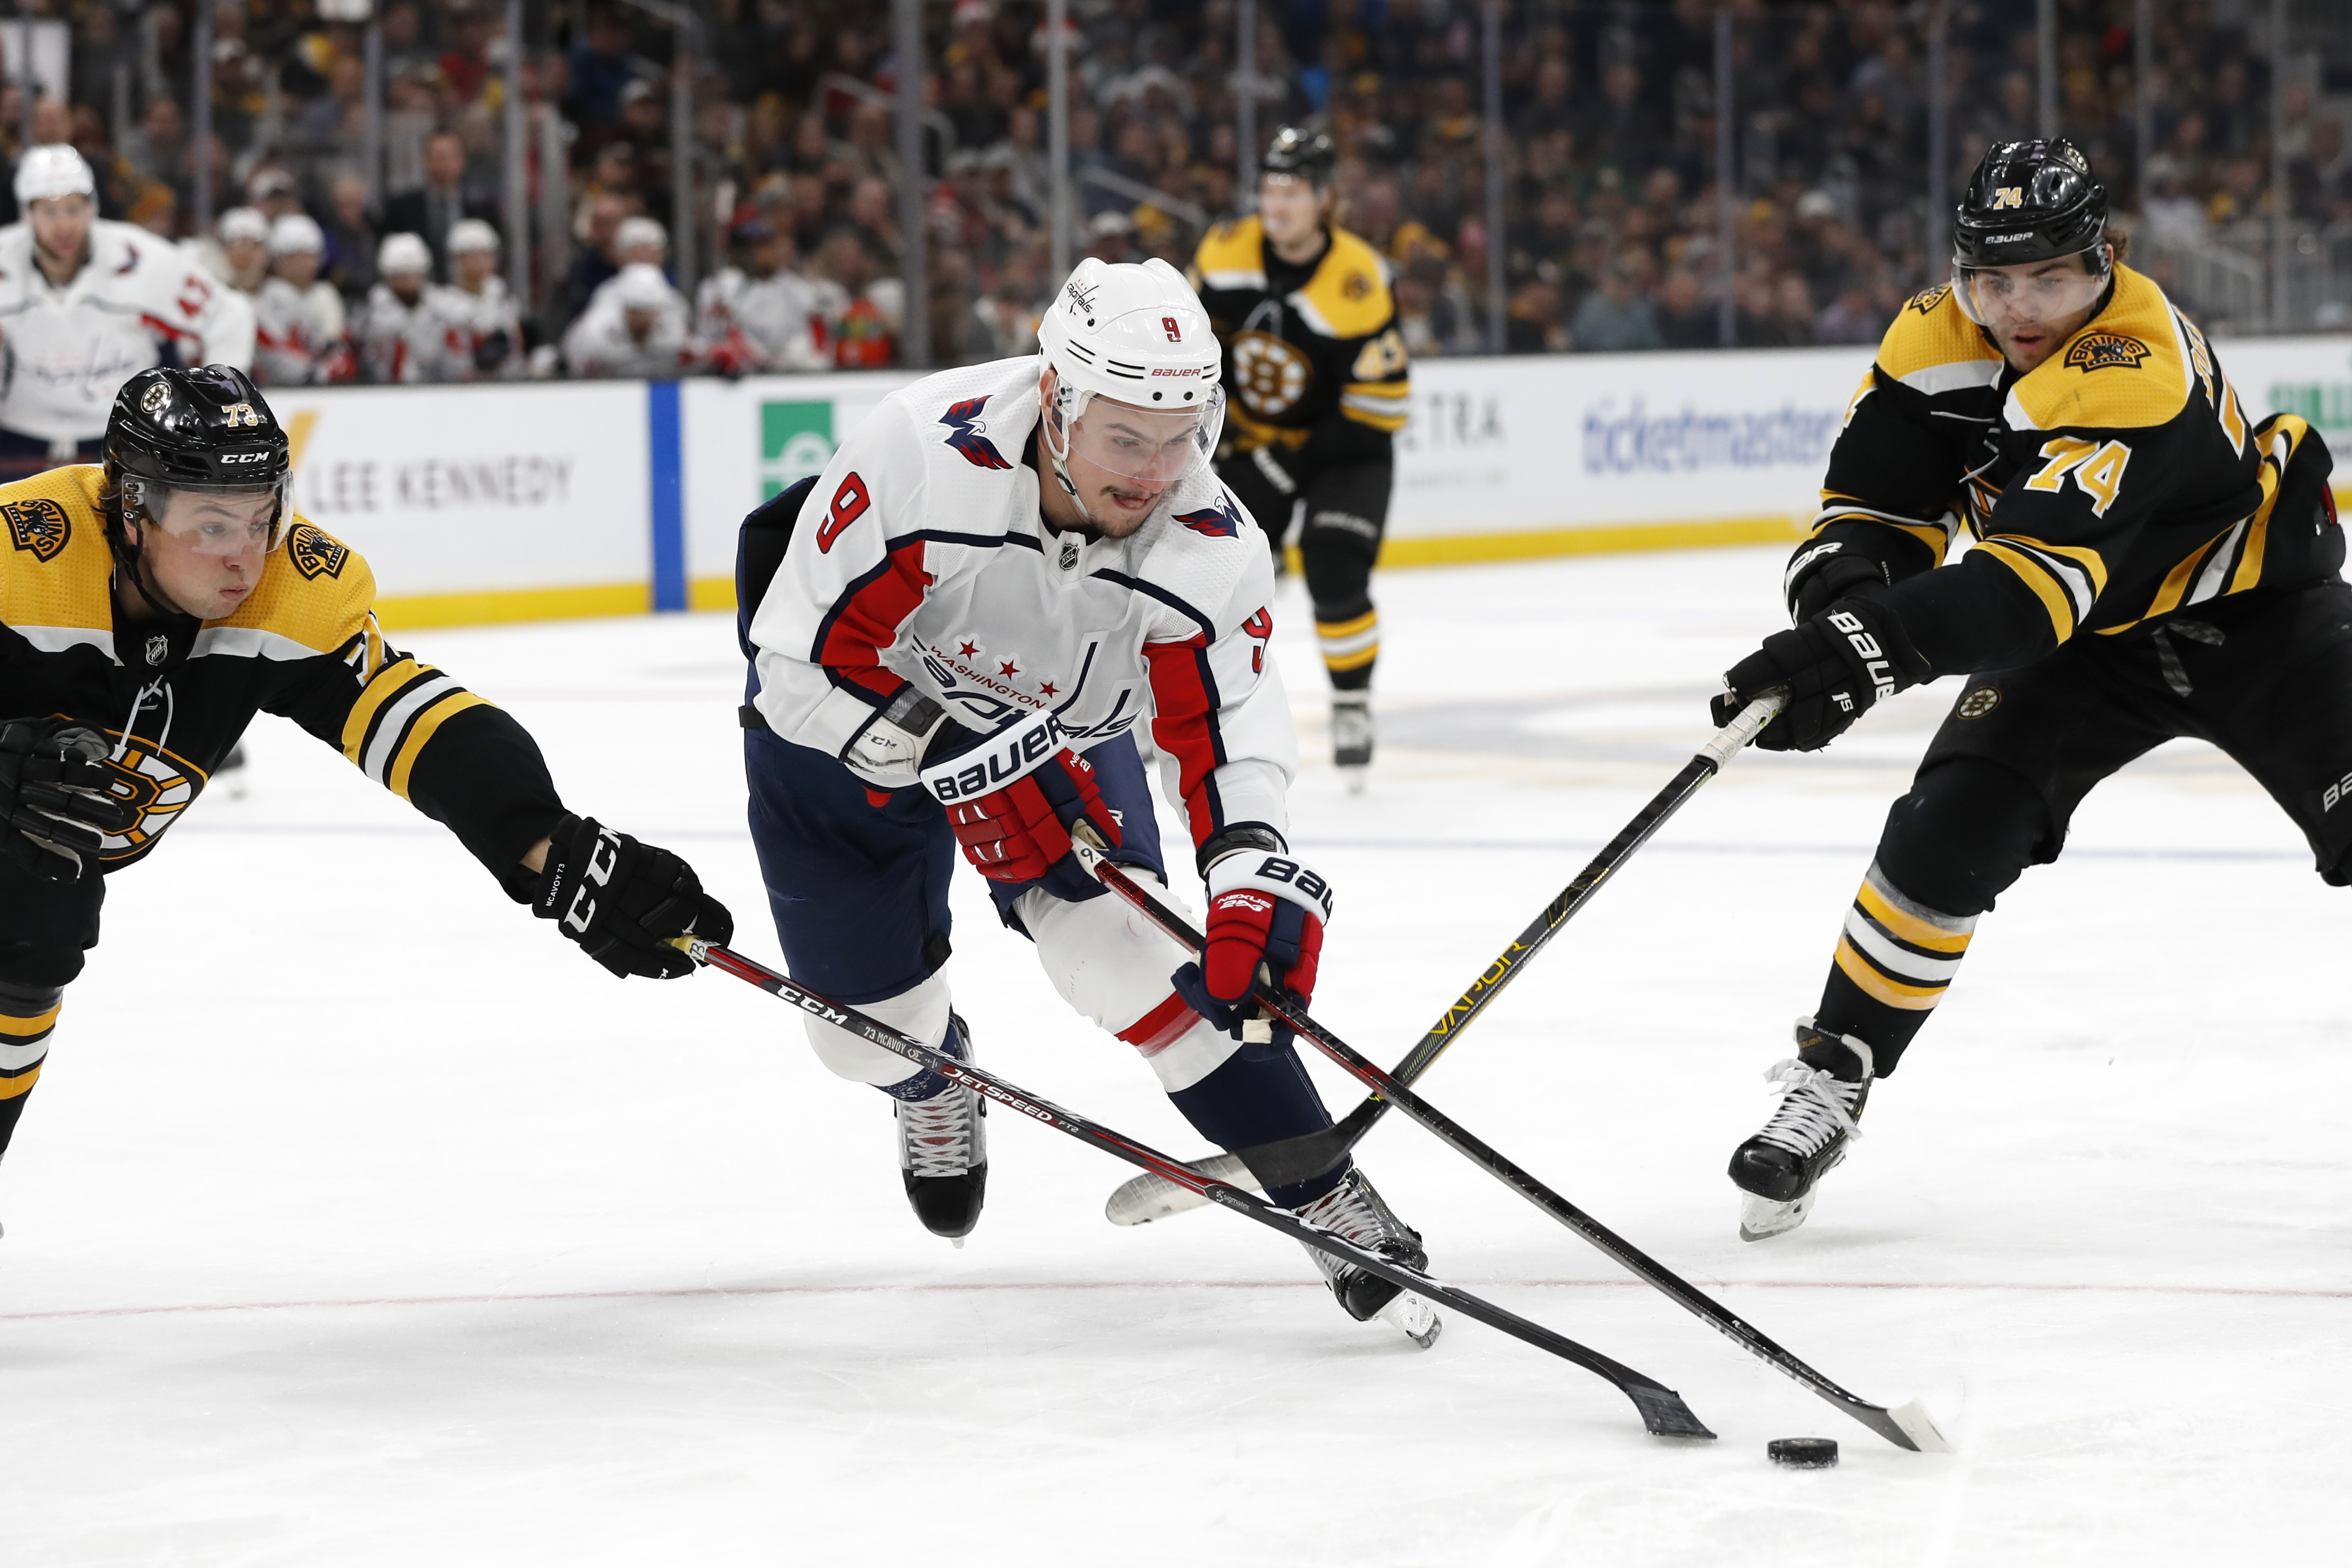 Bruins acquire Hathaway, Orlov from Capitals for Smith, picks